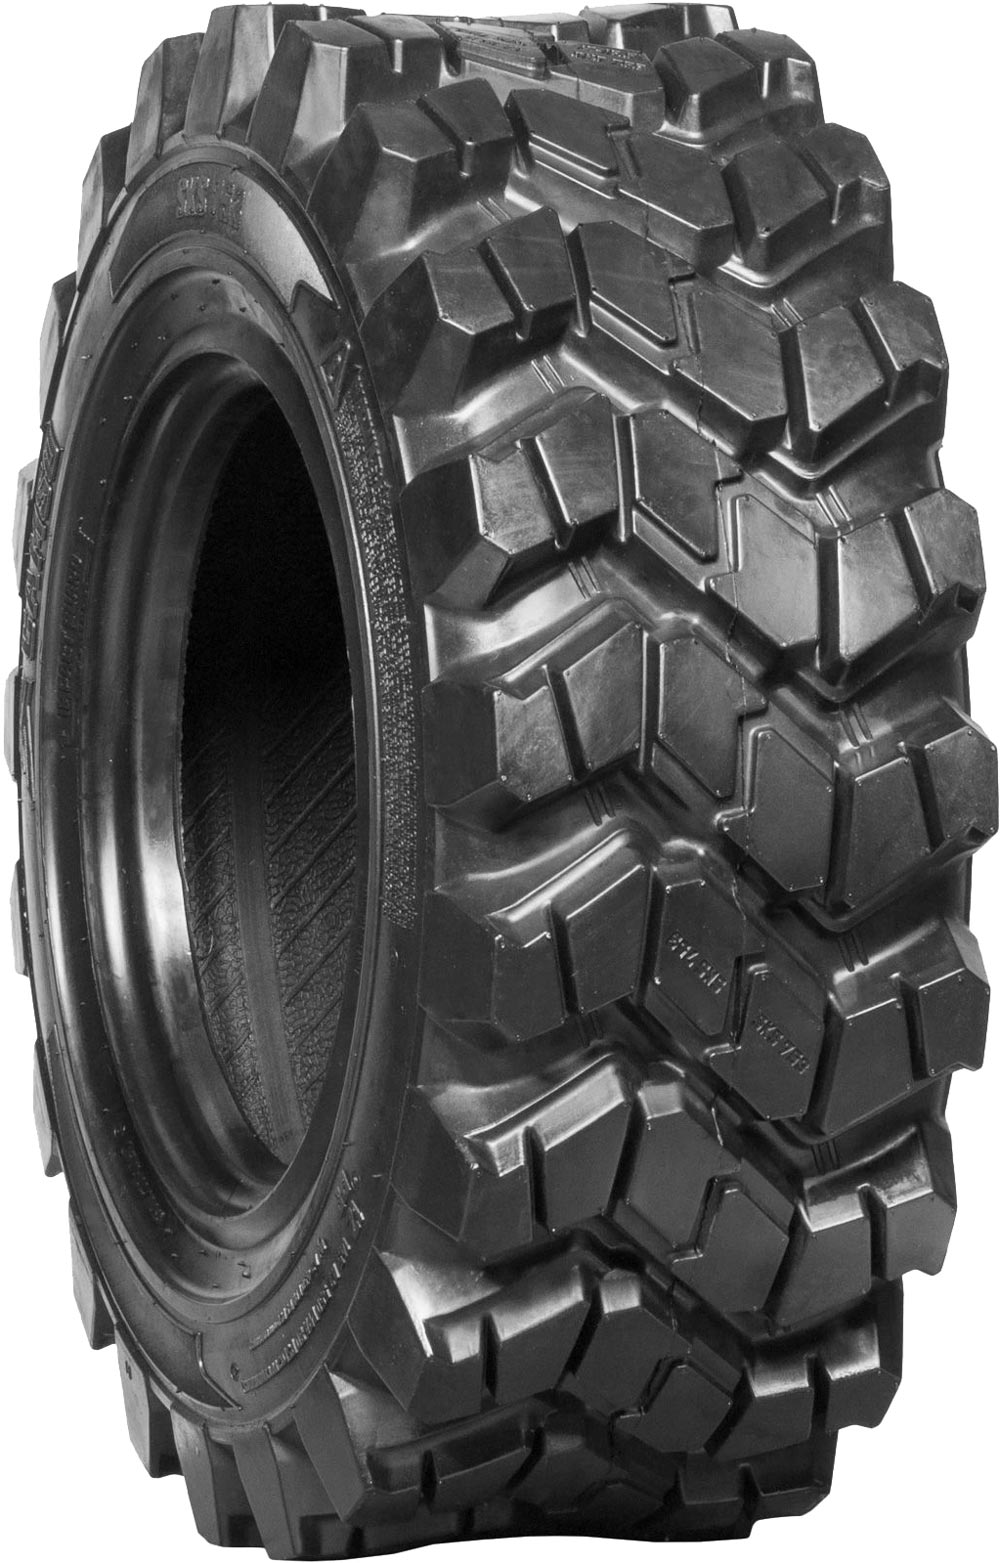 product_type-industrial_tires Camso SKS 753 8PR TL 27 R8.5 N